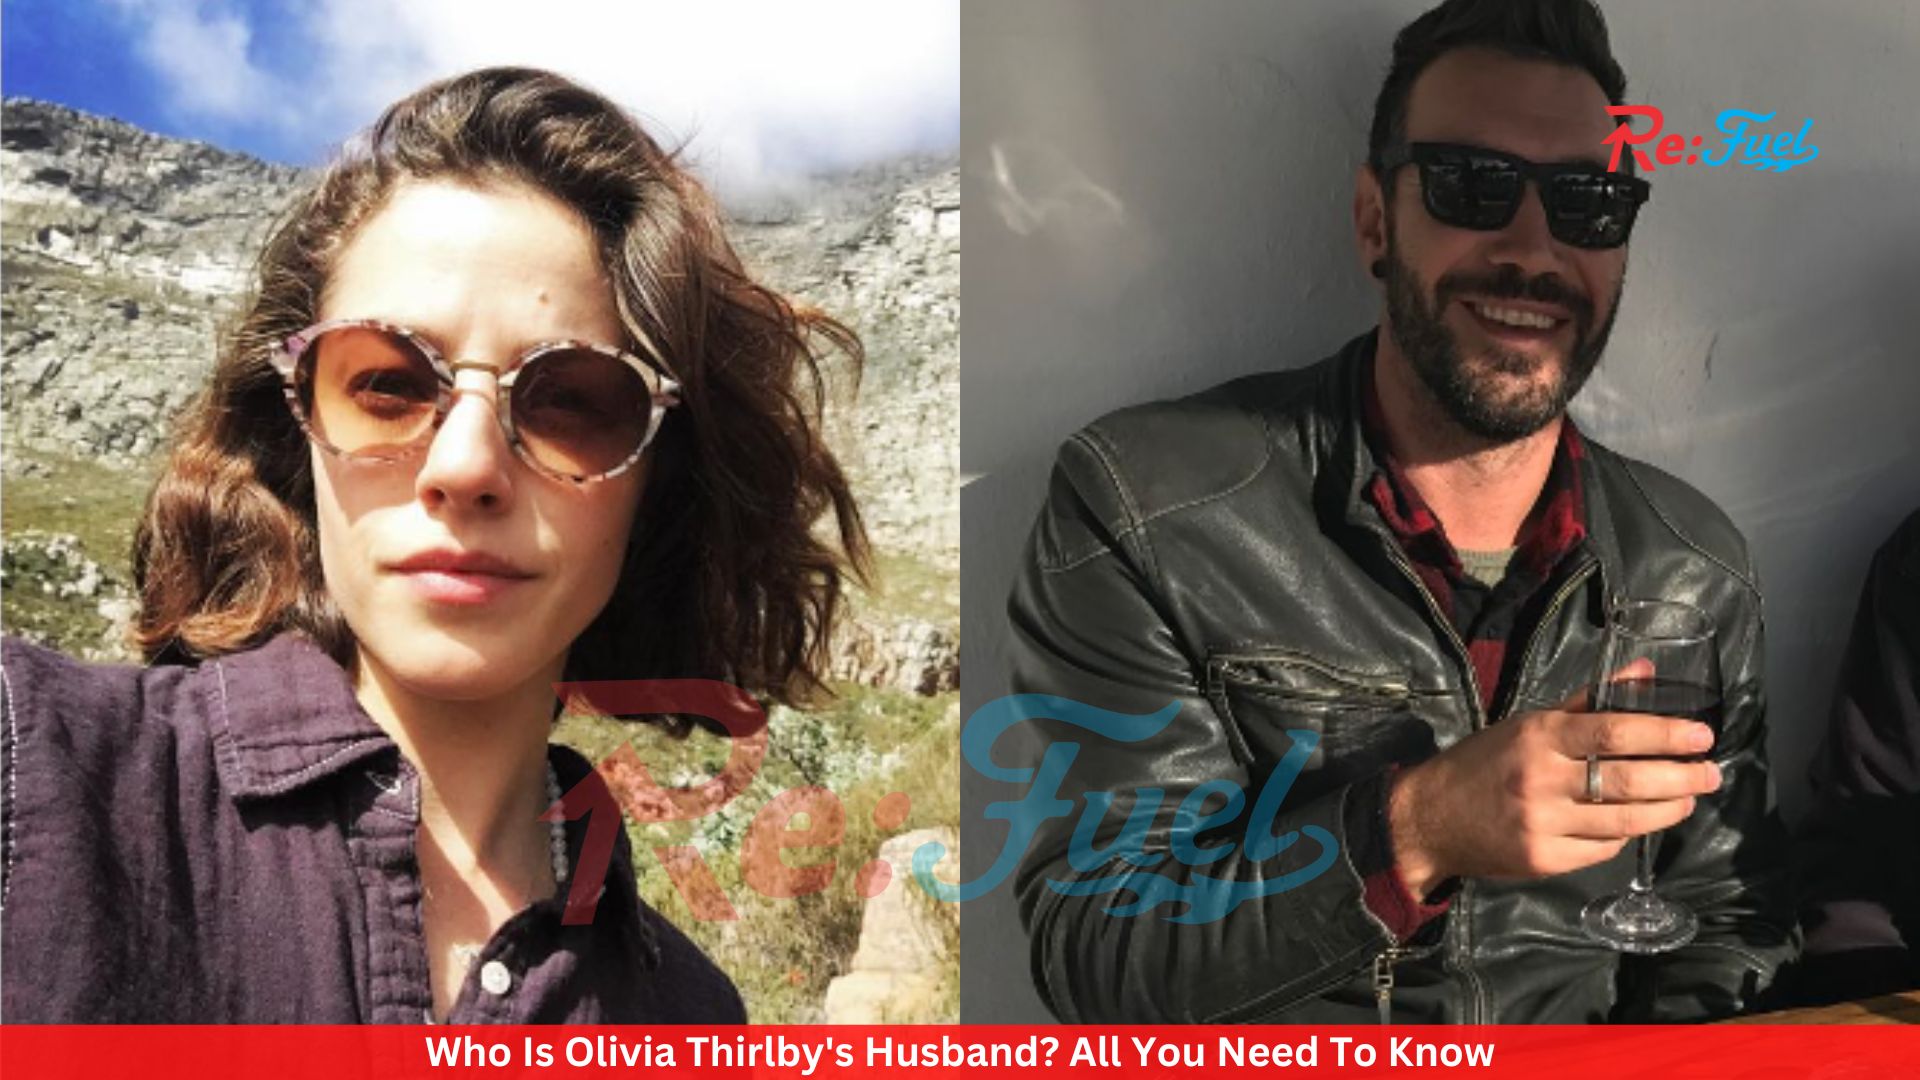 Who Is Olivia Thirlby's Husband? All You Need To Know